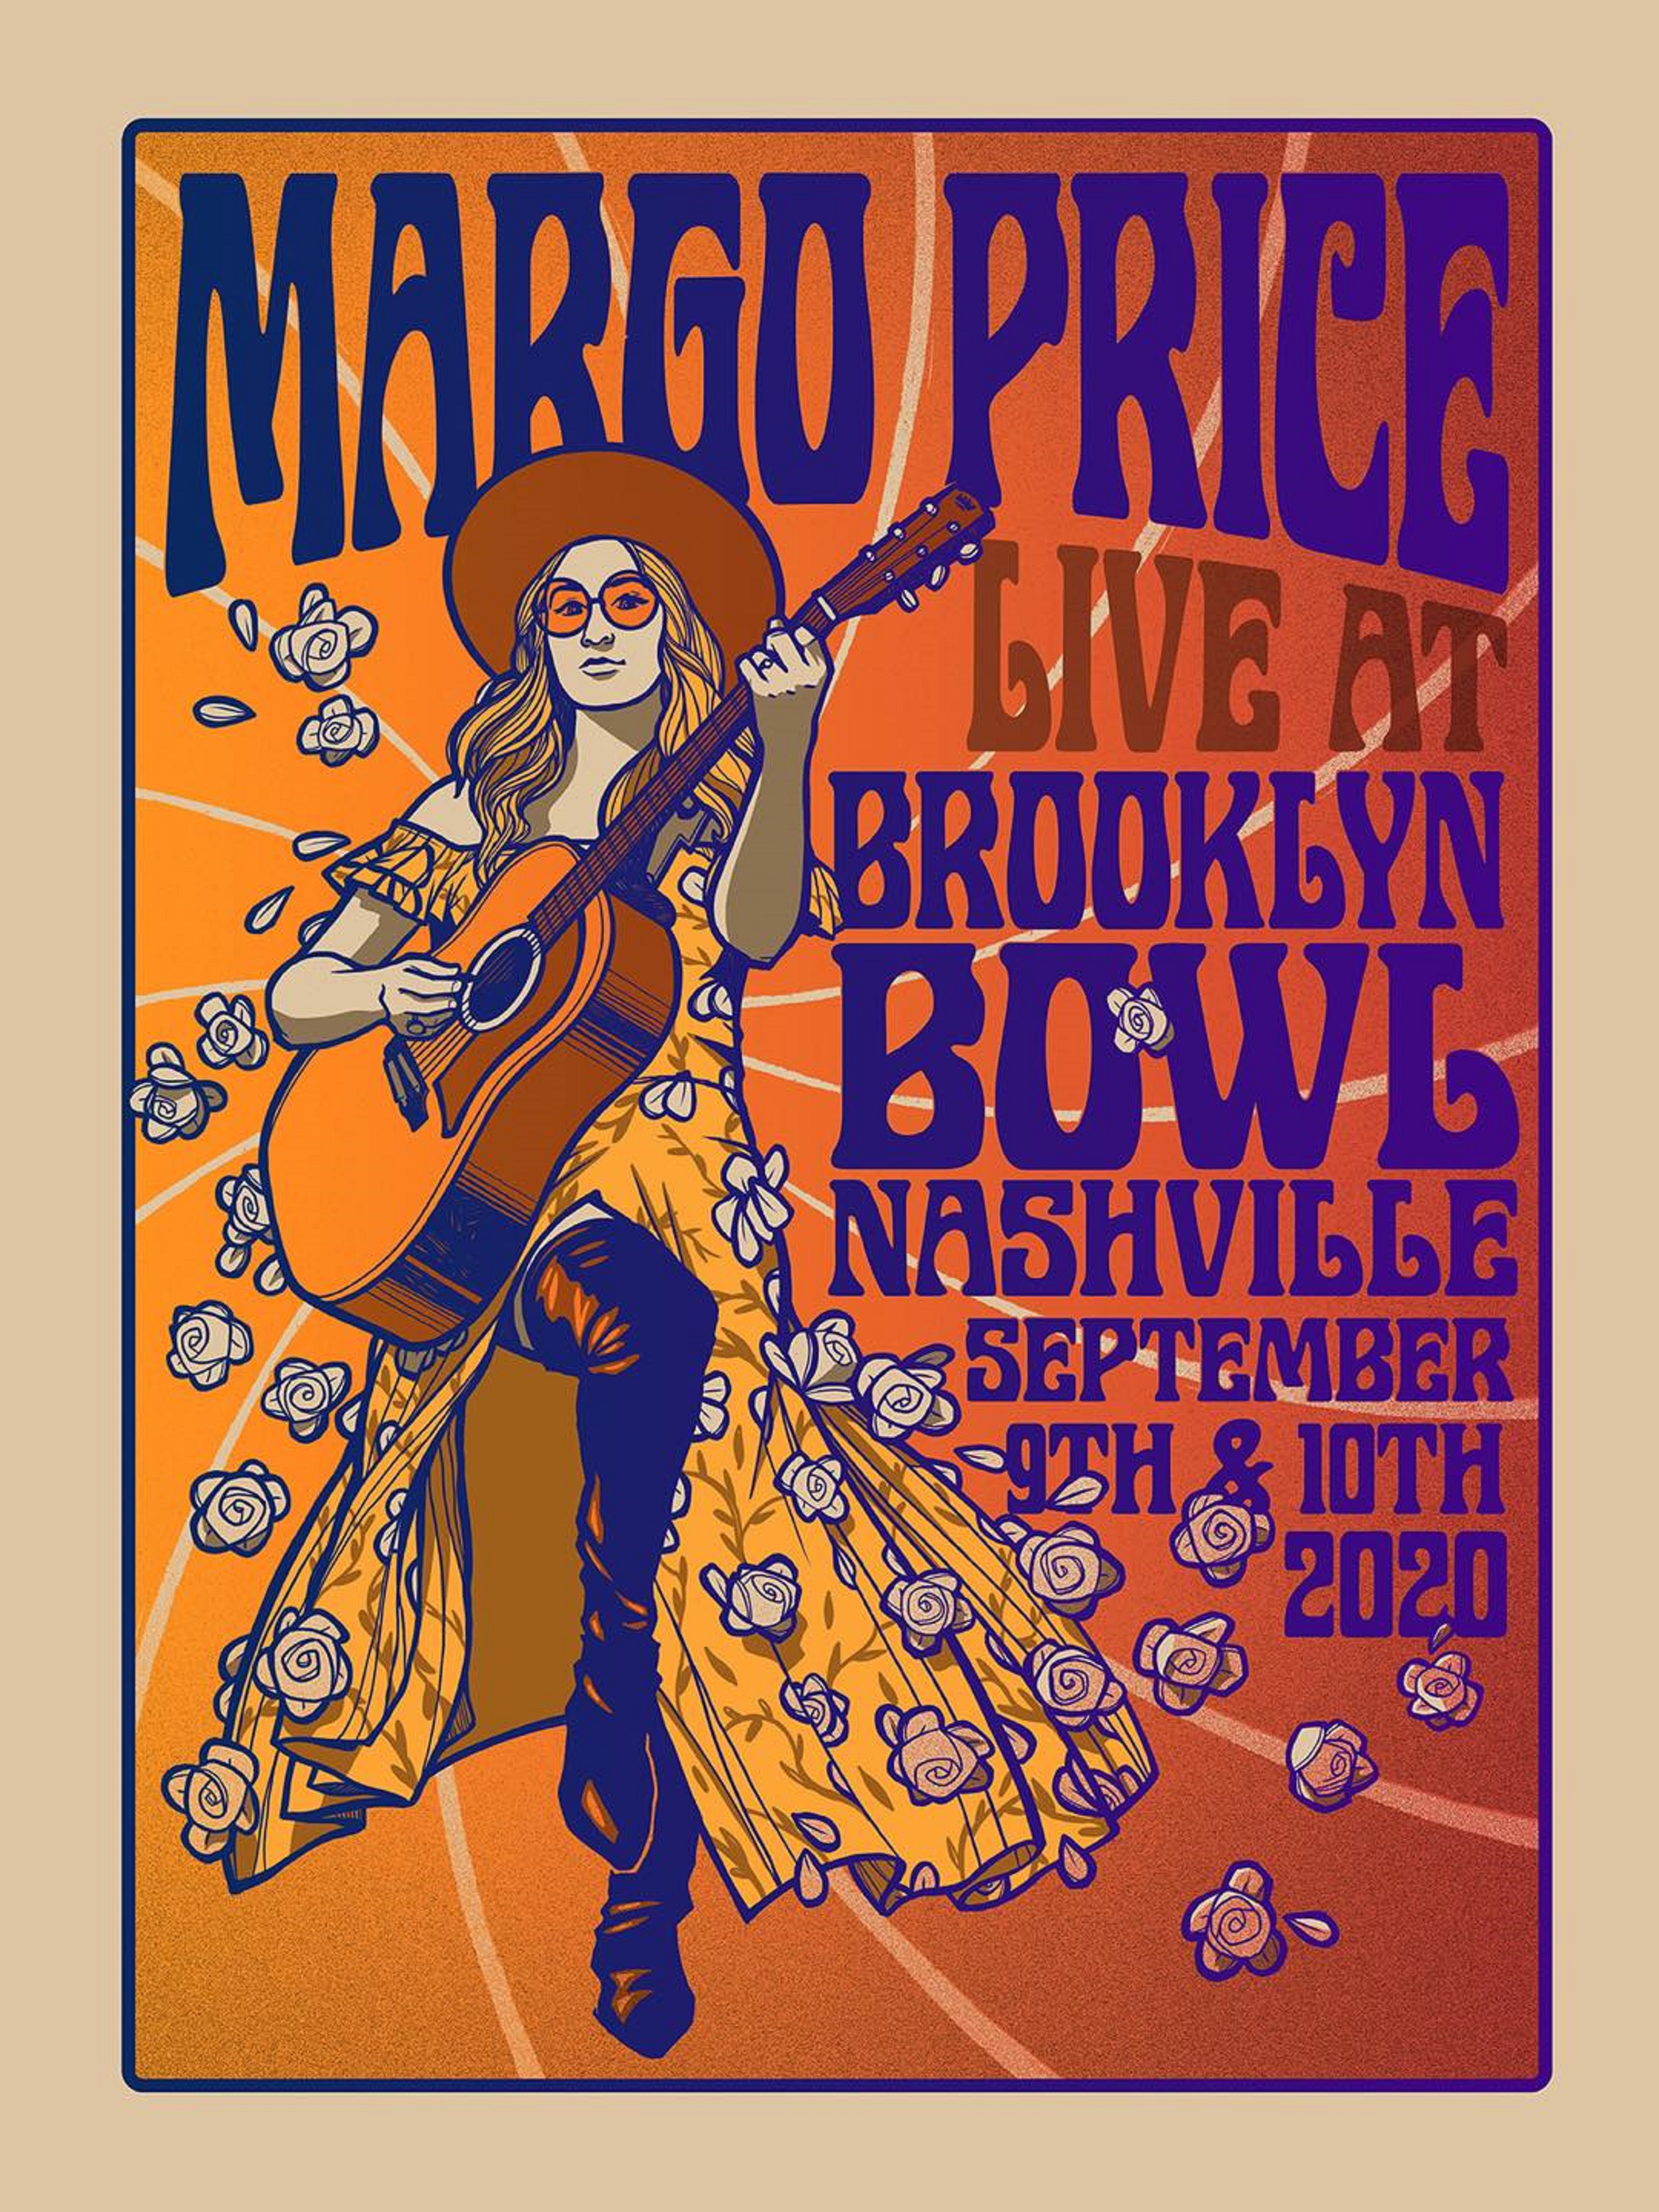 Margo Price Live From Brooklyn Bowl Nashville on SEP 9 + 10